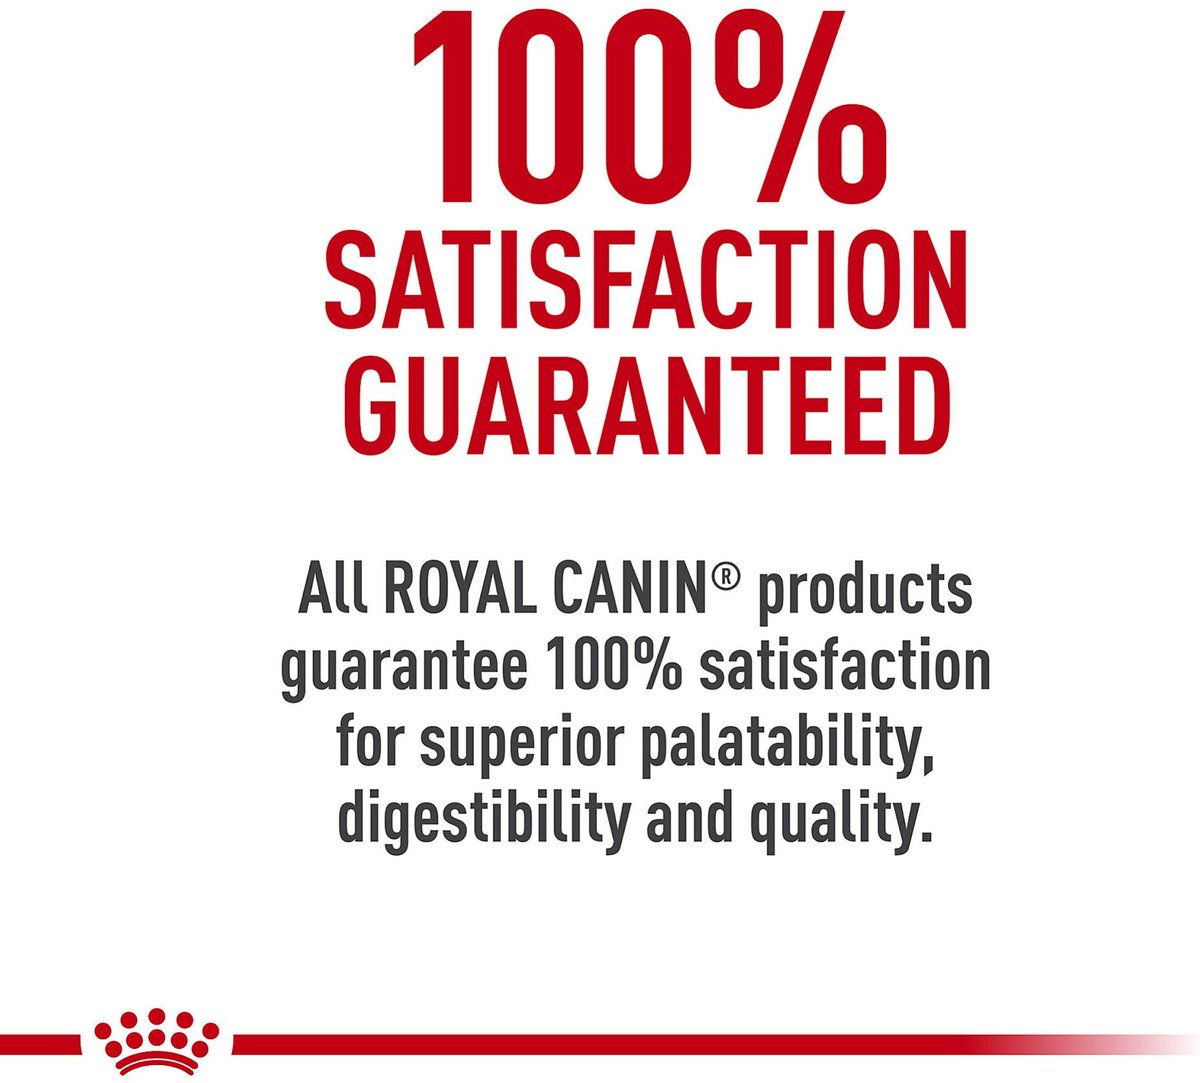 ROYAL CANIN VETERINARY DIET Recovery Ultra Soft Mousse in Sauce Wet Dog &  Cat Food, 5.1-oz, case of 24 